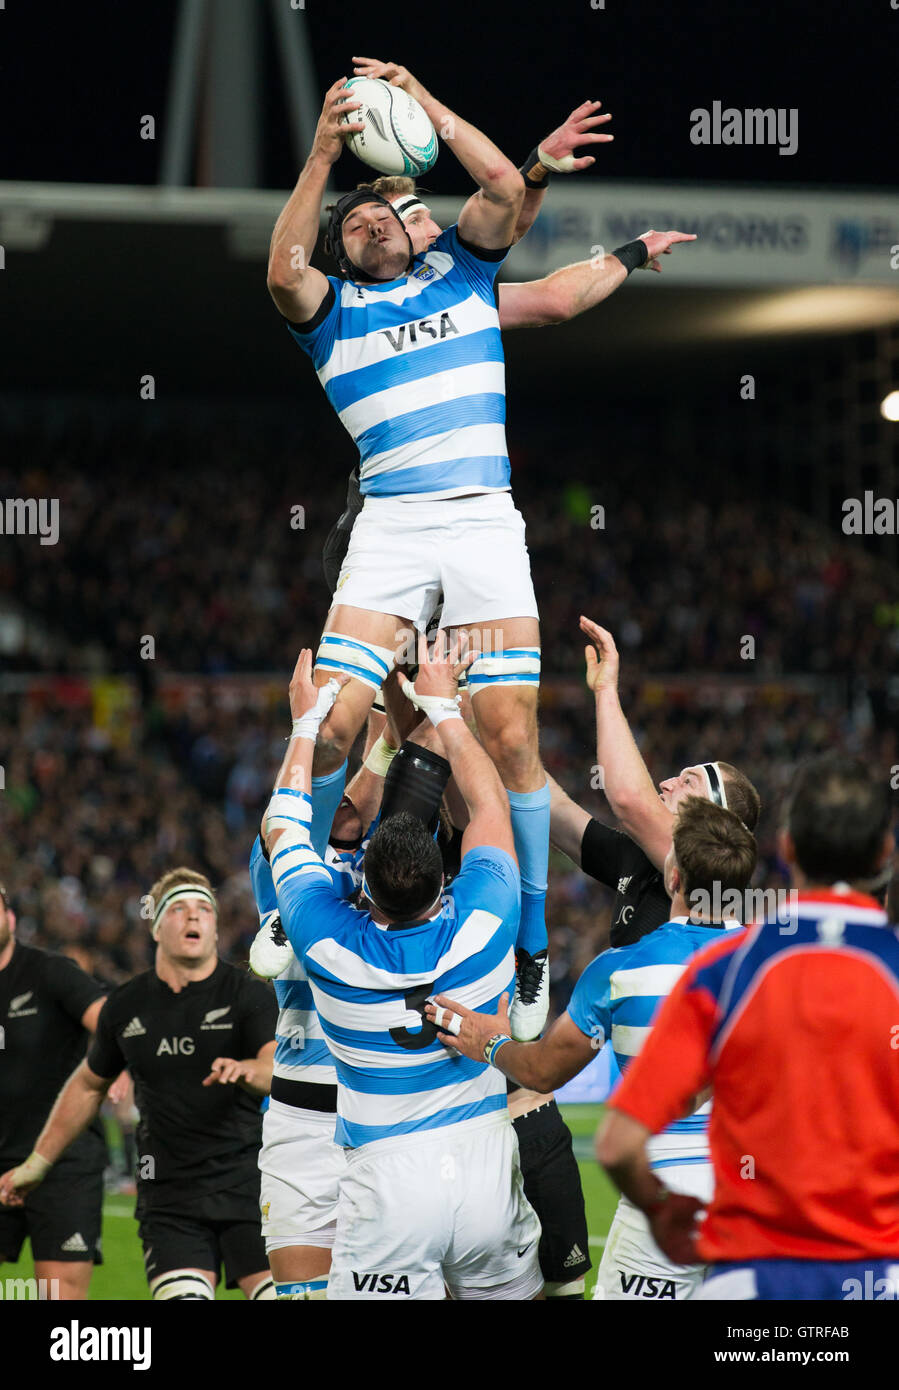 Hamilton, New Zealand. 10th Sep, 2016. The Rugby Championship, New Zealand  All Blacks versus Argentina Pumas. NZ captain Kieran Read goes high in a  lineout but loses possession during the Credit: Action